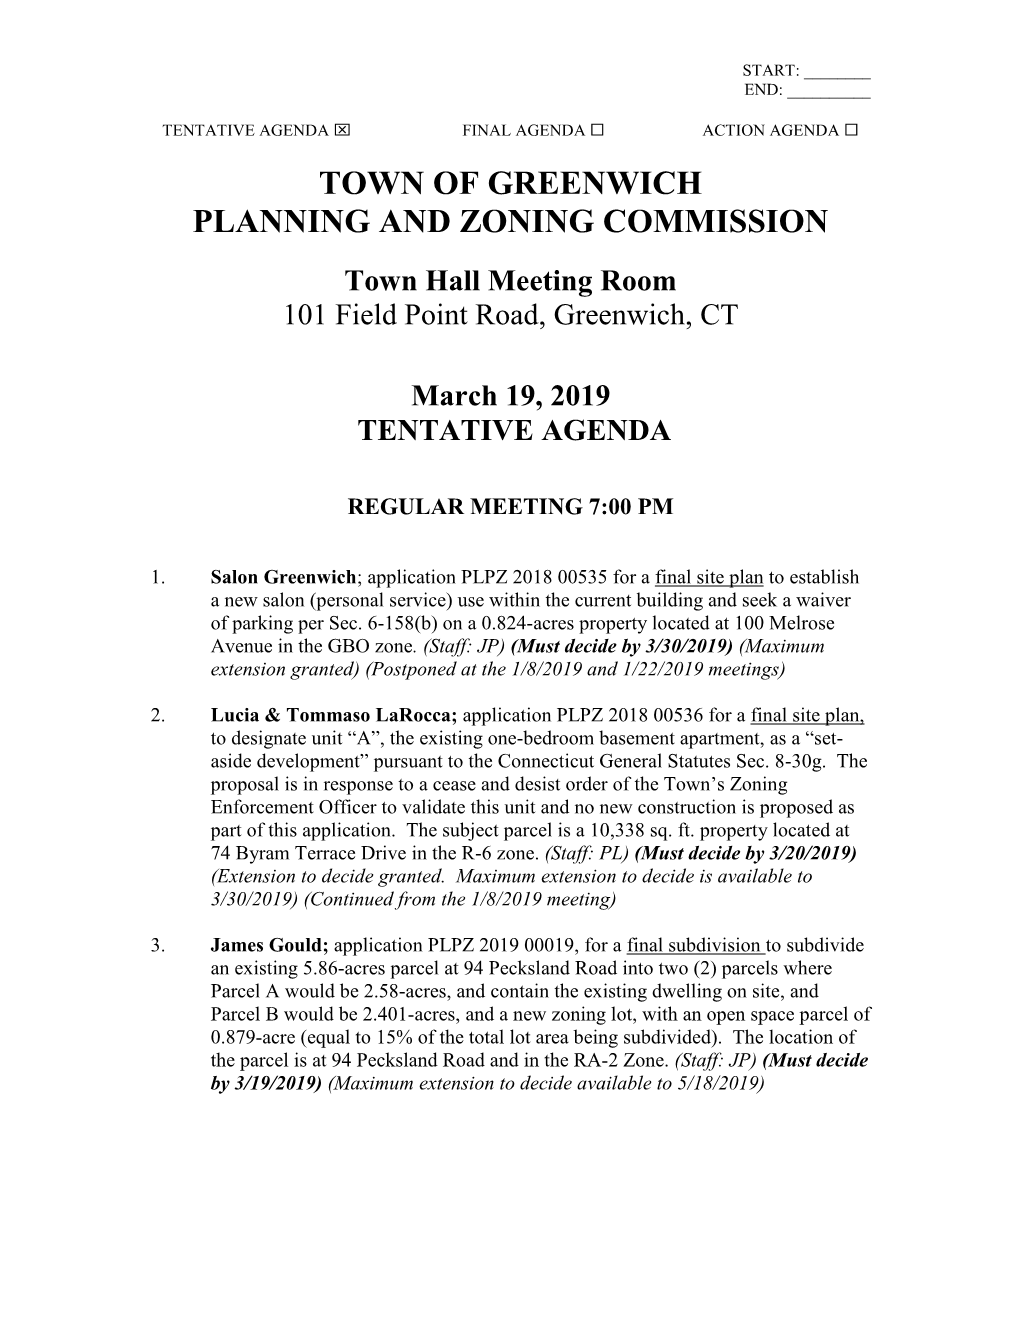 Town of Greenwich Planning and Zoning Commission